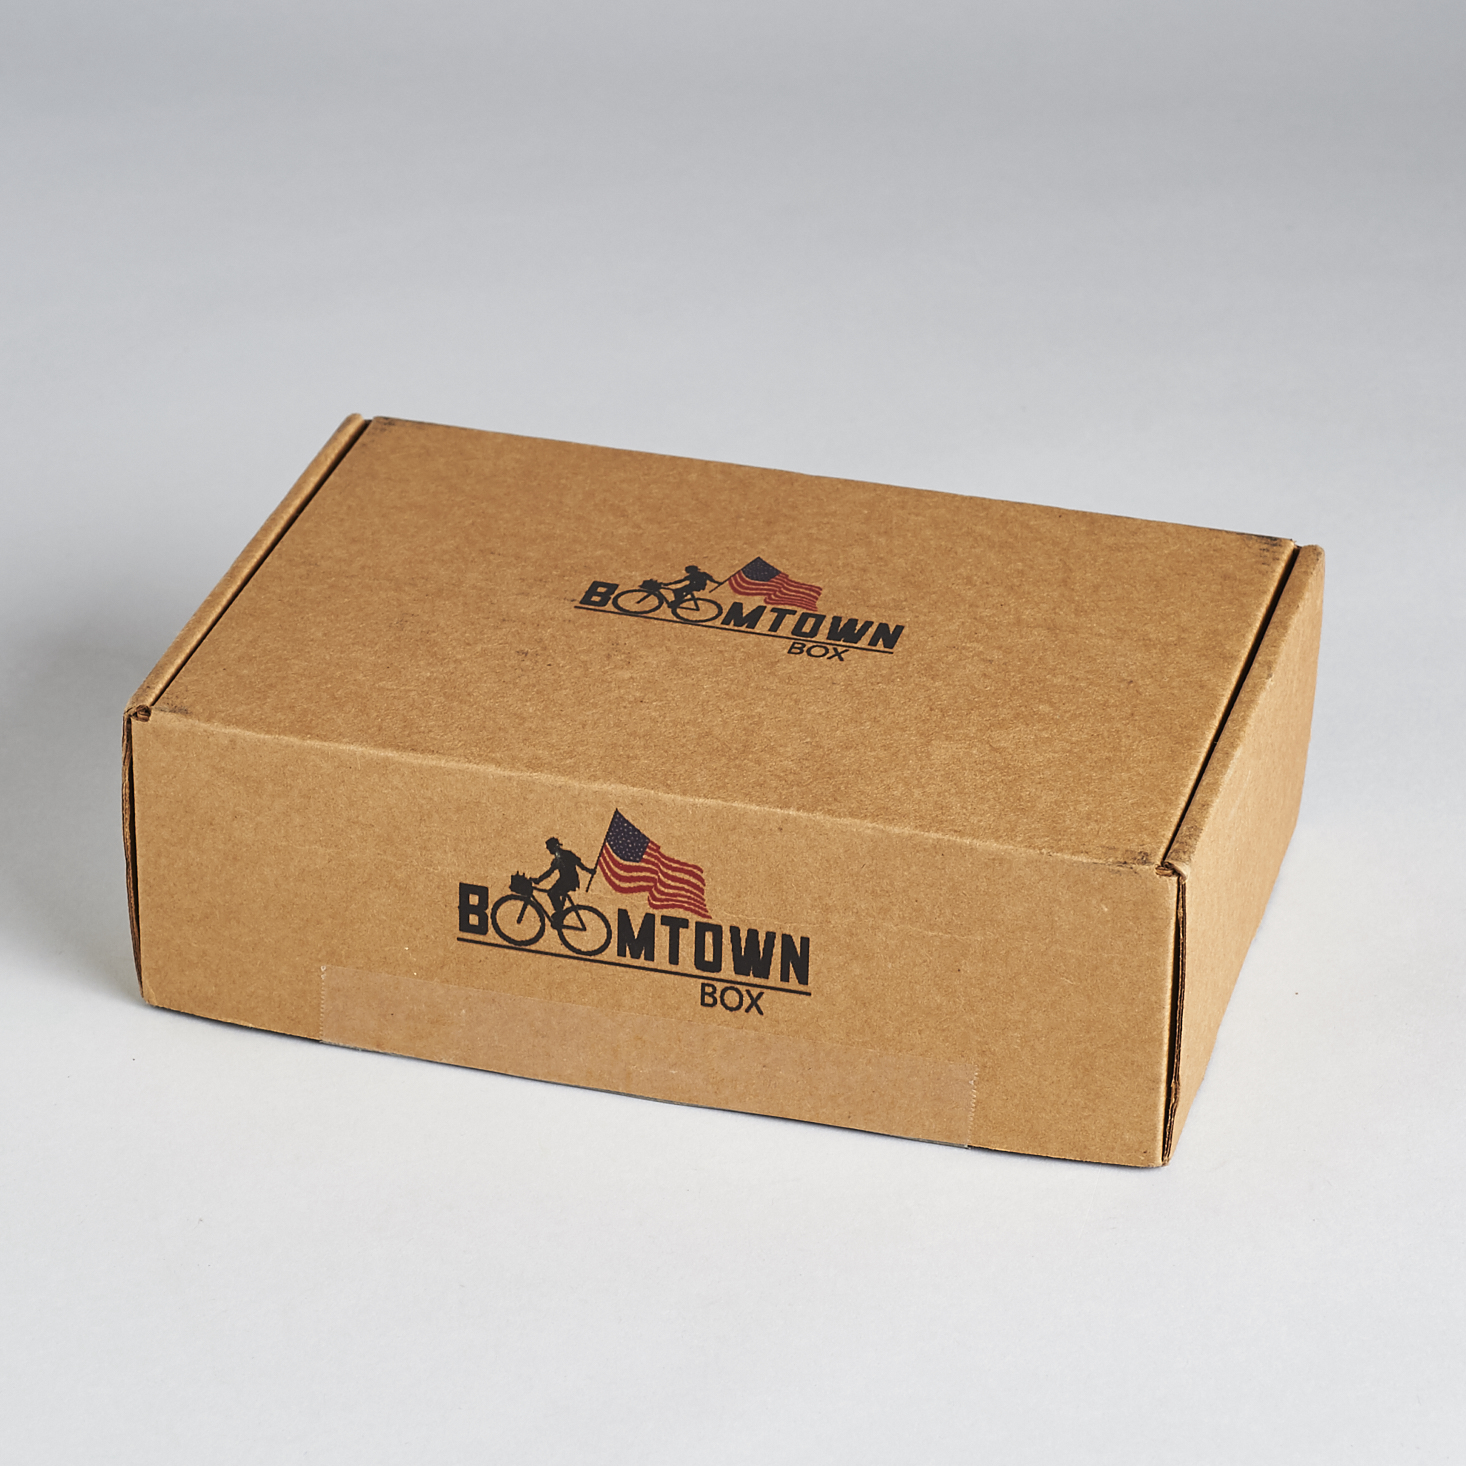 Boomtown Box Subscription Box Review – April 2017